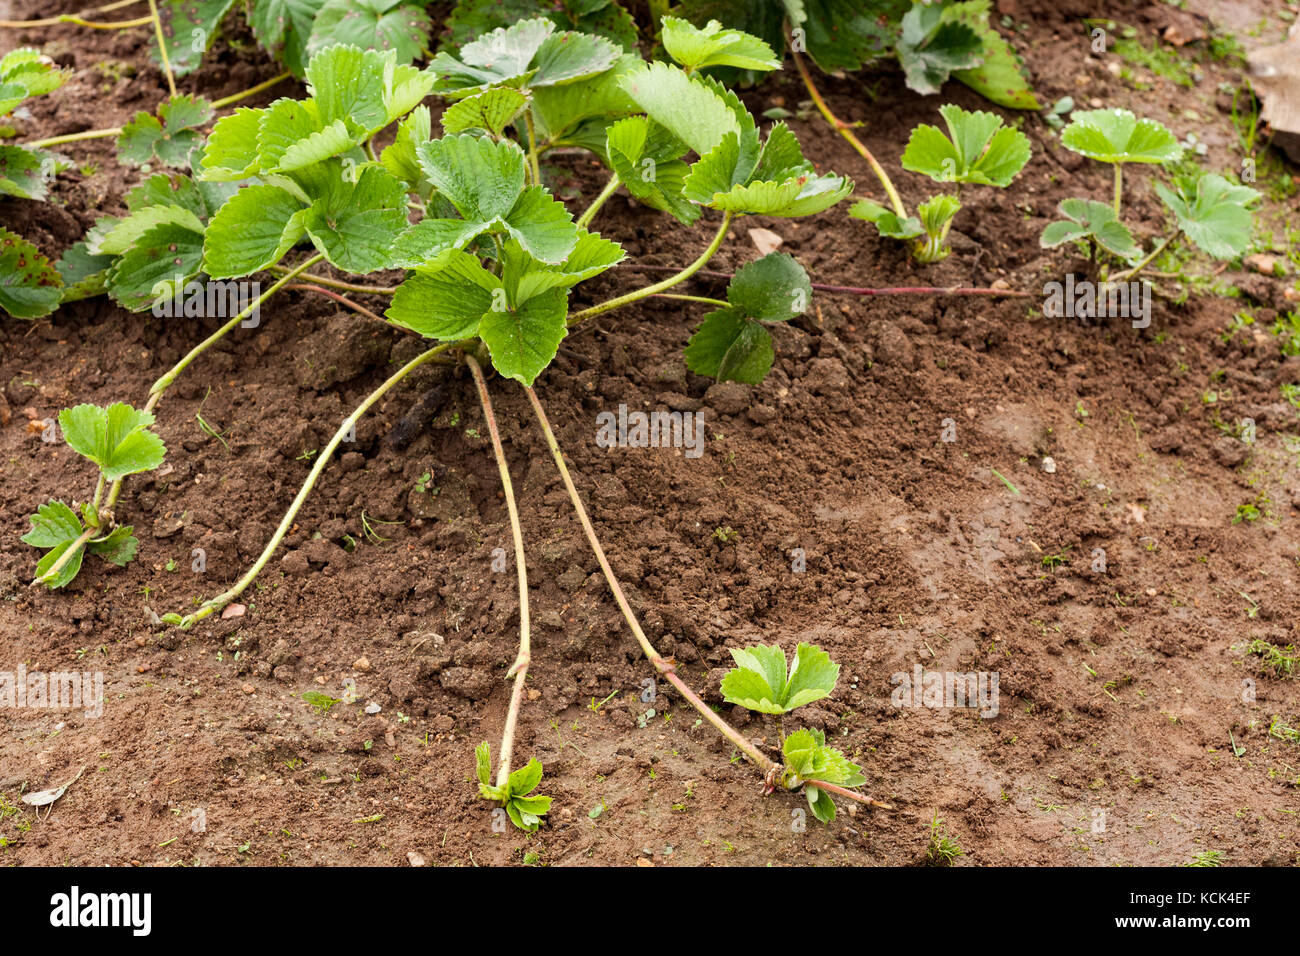 Bush Strawberry Plant With Runners (Stolens) For Propagation In Garden Outdoor. Stock Photo